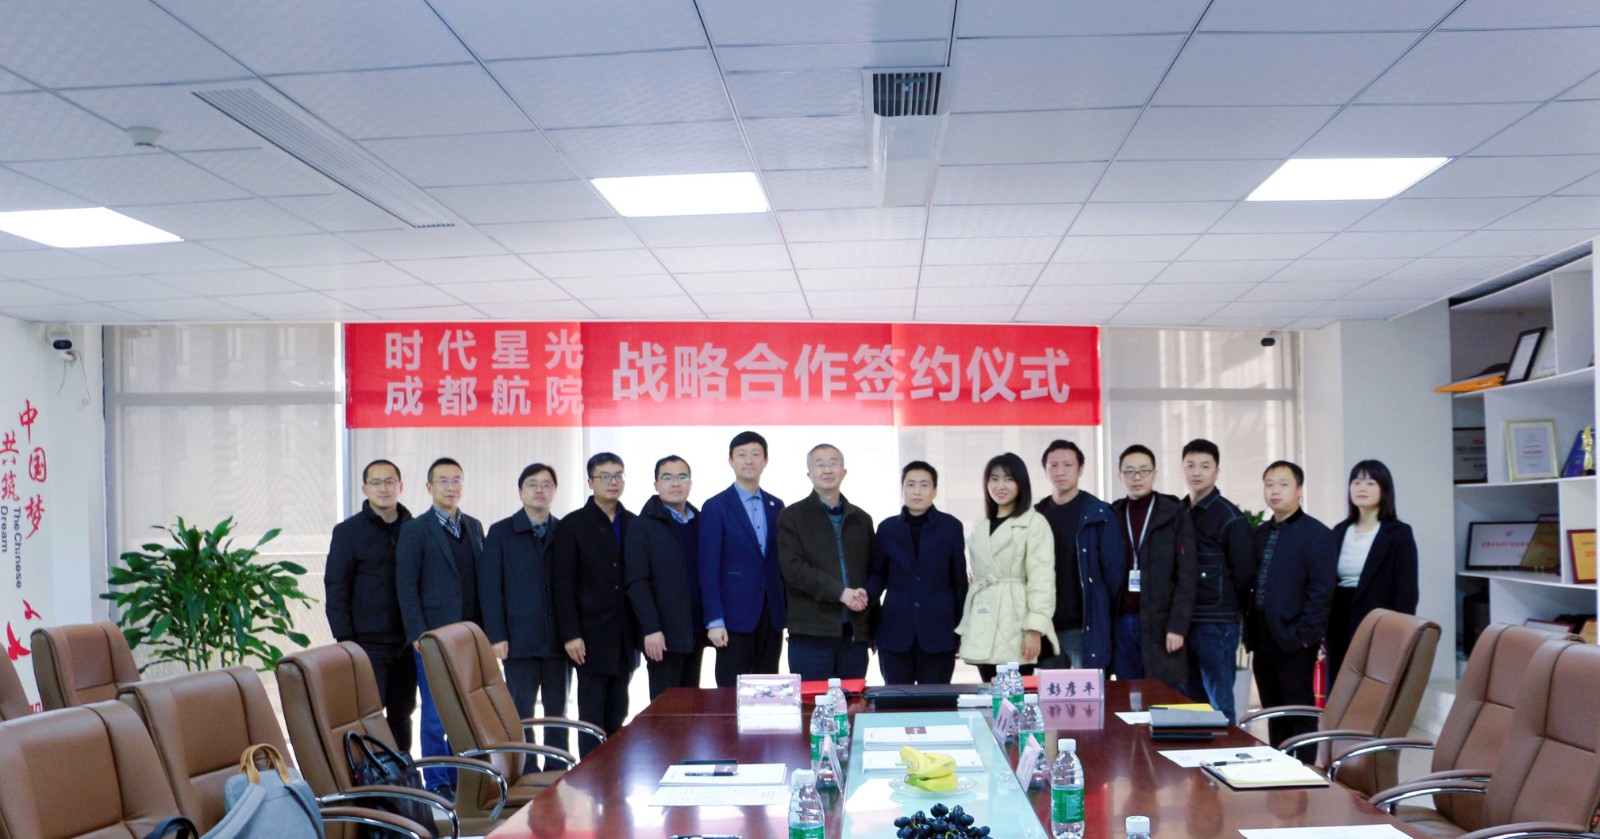 Promote industry-university-research strategic cooperation! Timestech joins hands with Chengdu Aviation Academy to build an 